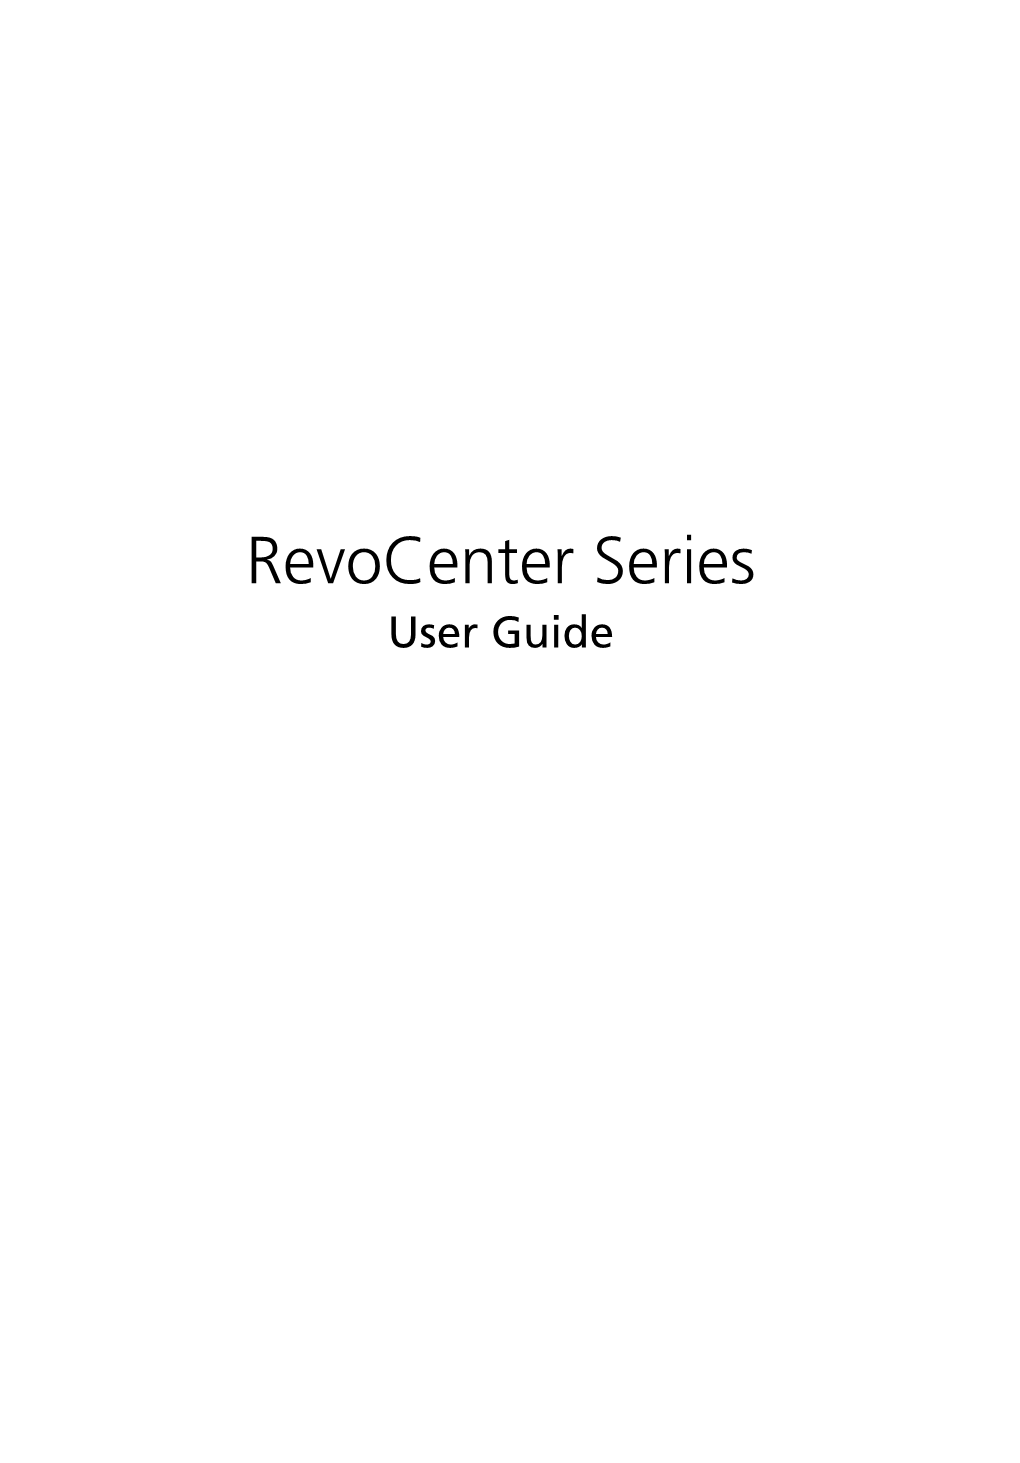 Revocenter Series User Guide Copyright © 2011 All Rights Reserved